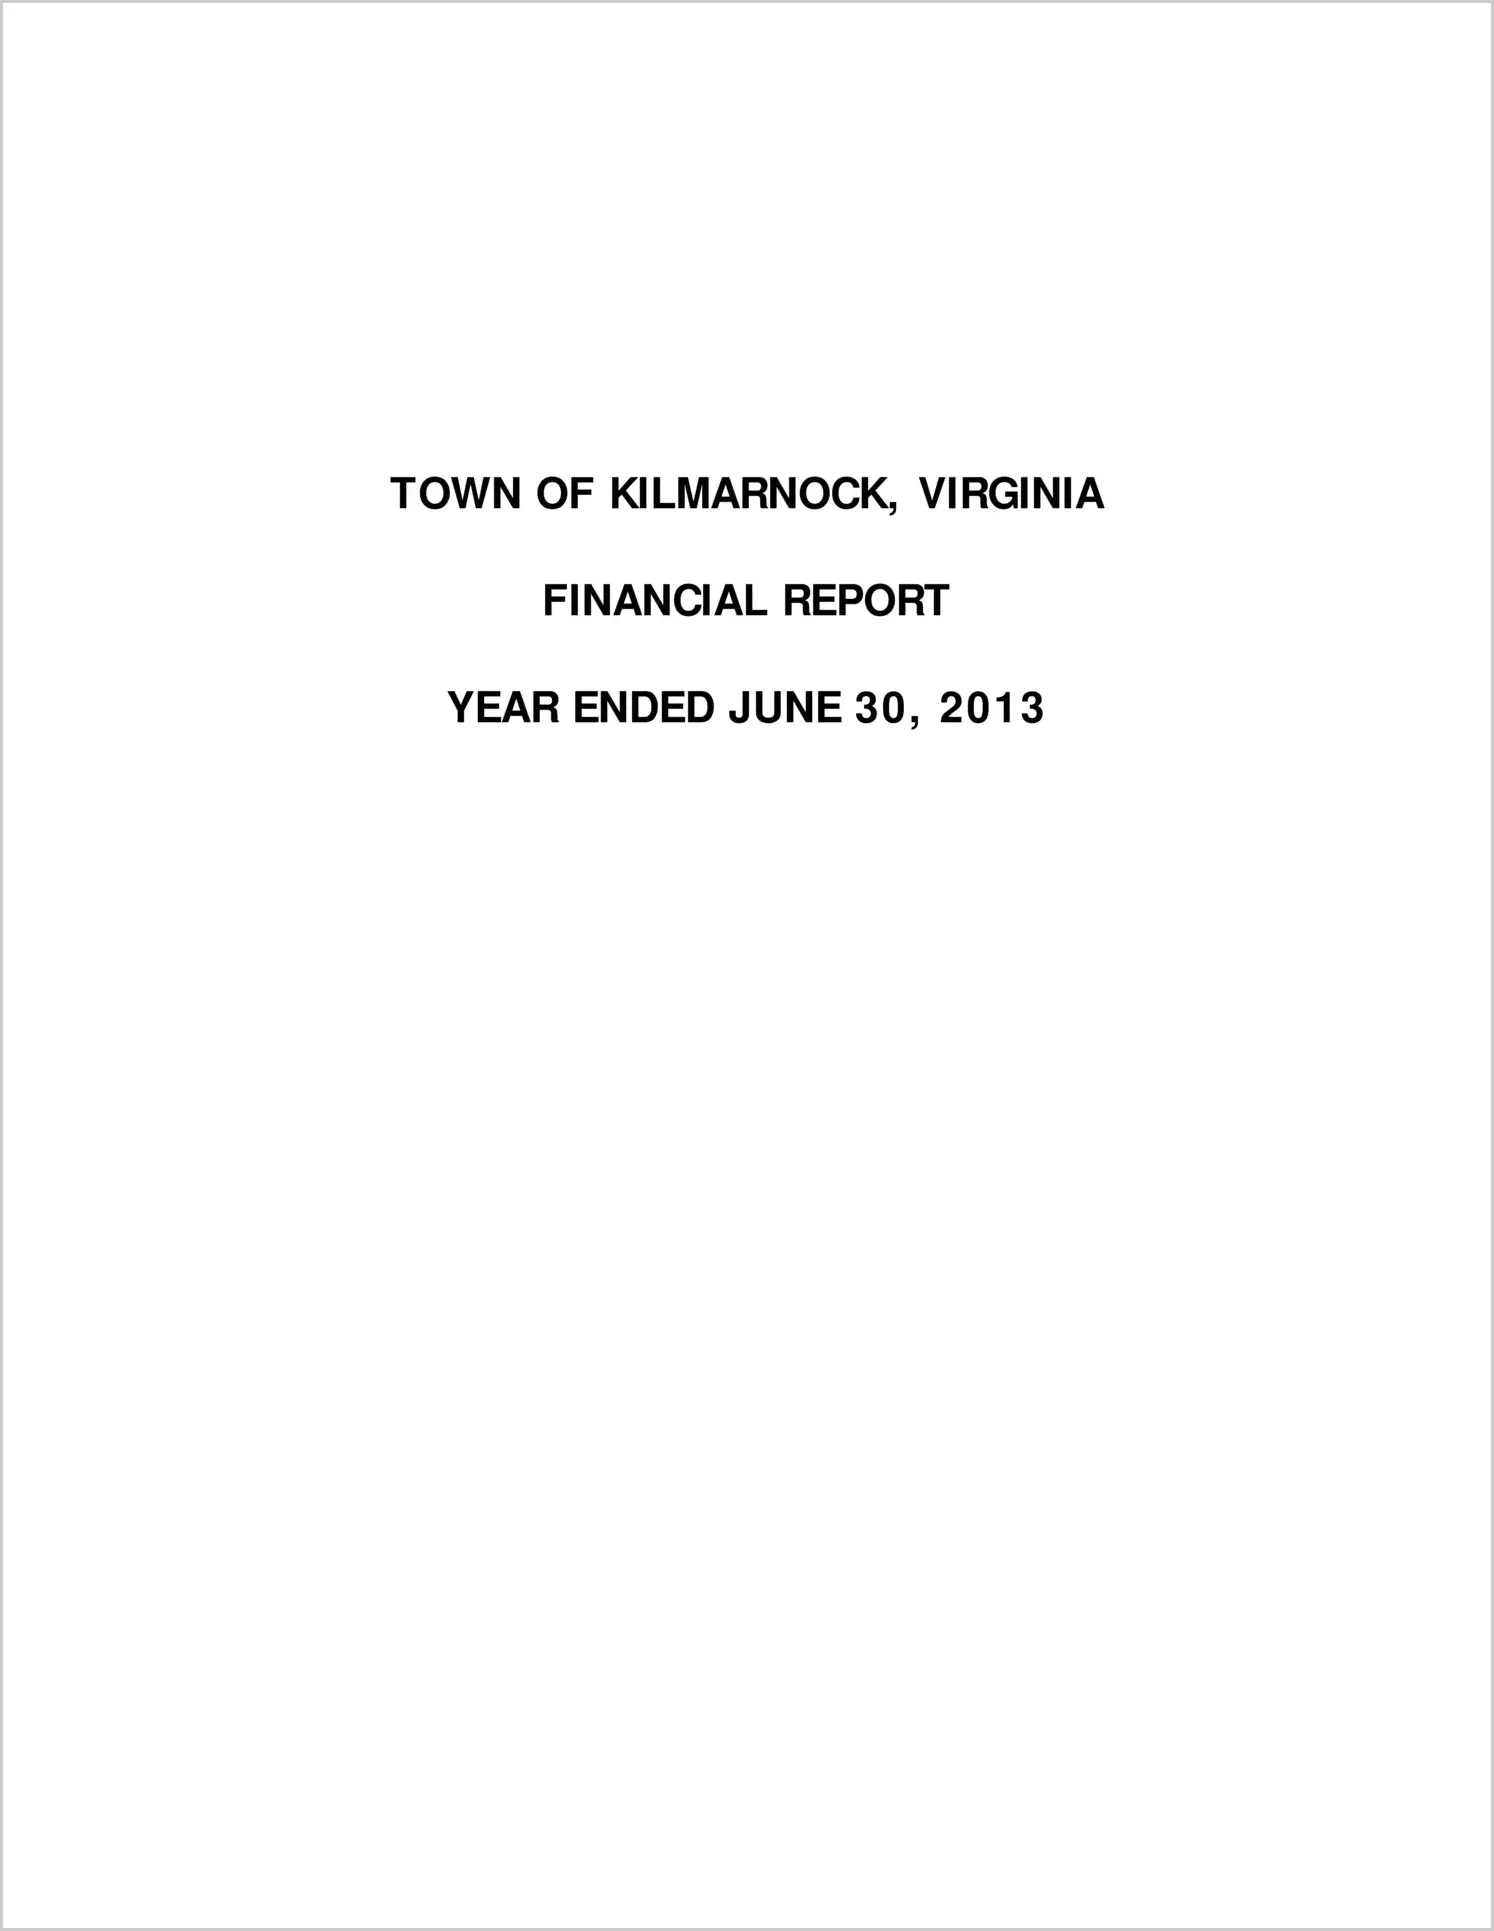 2013 Annual Financial Report for Town of Kilmarnock